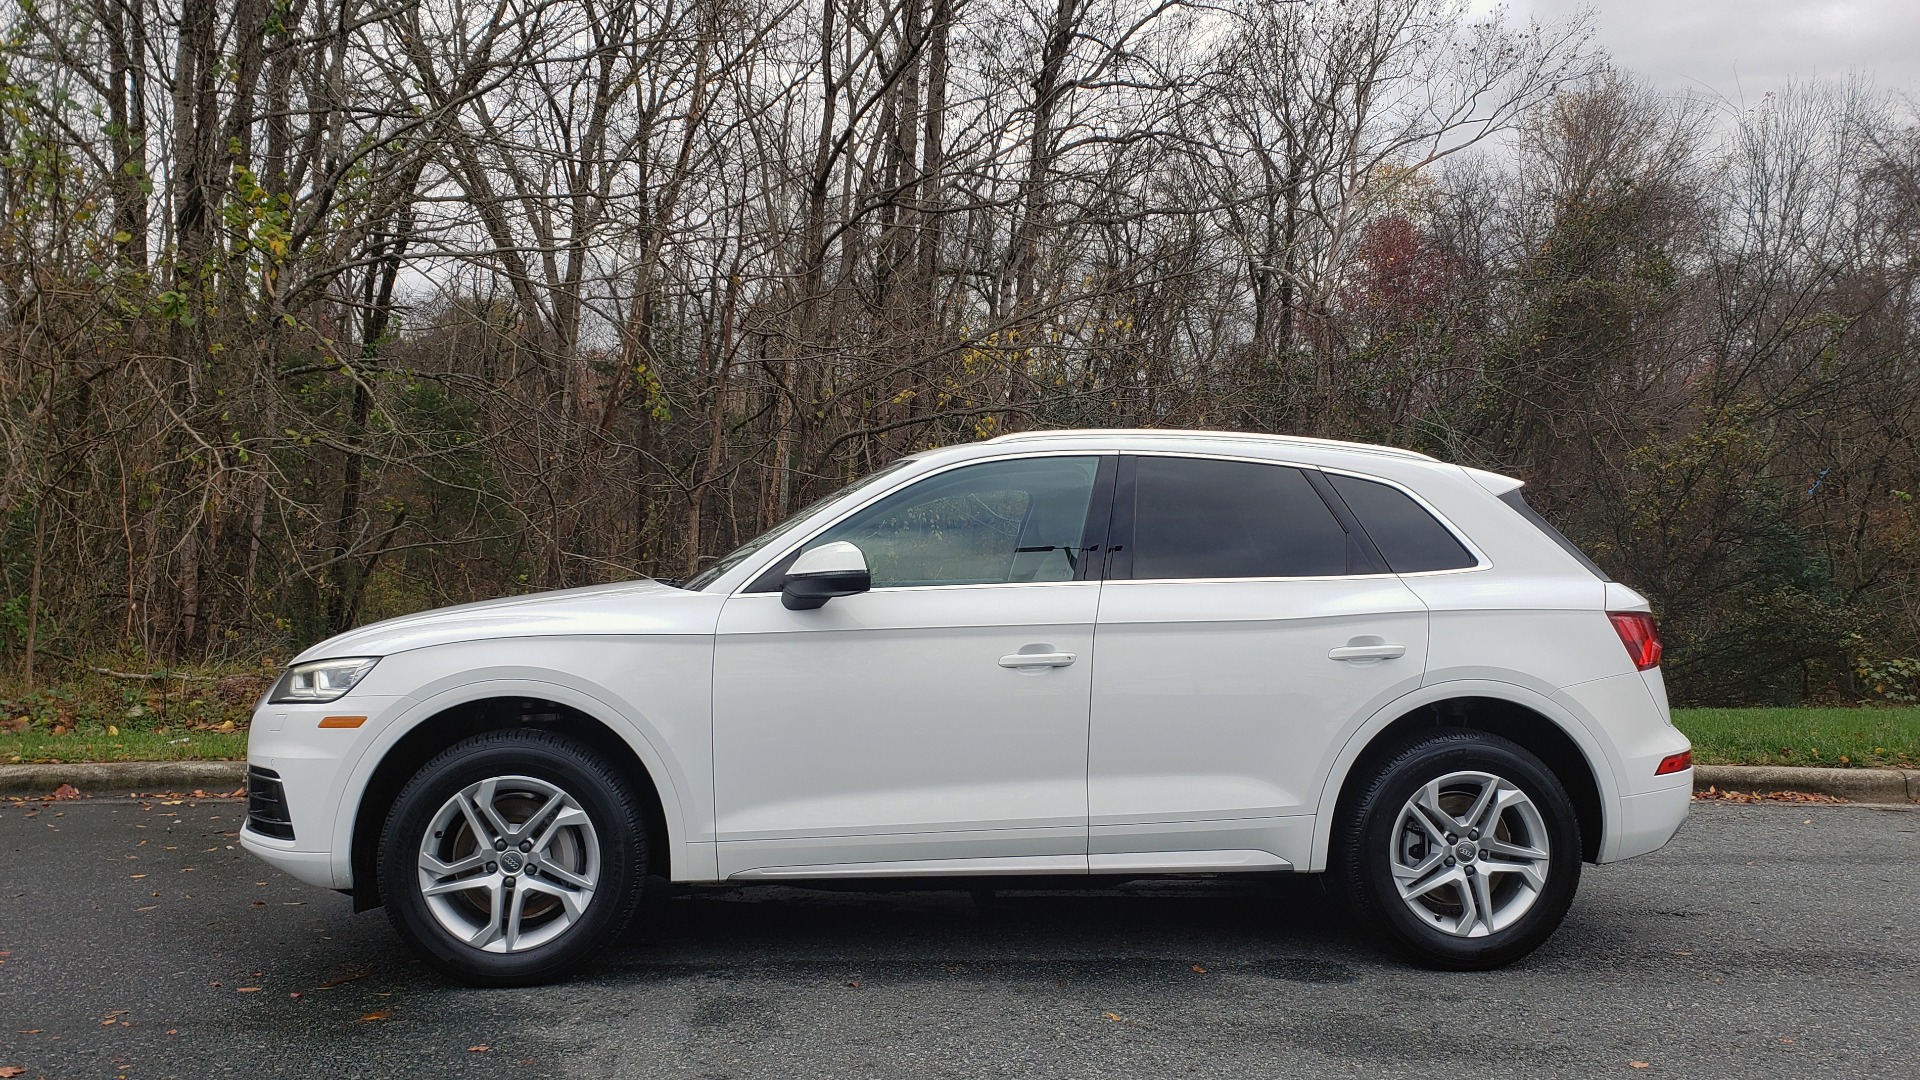 Used 2018 Audi Q5 PREMIUM PLUS / NAV PKG / SUNROOF / CLD WTHR / REARVIEW for sale Sold at Formula Imports in Charlotte NC 28227 2